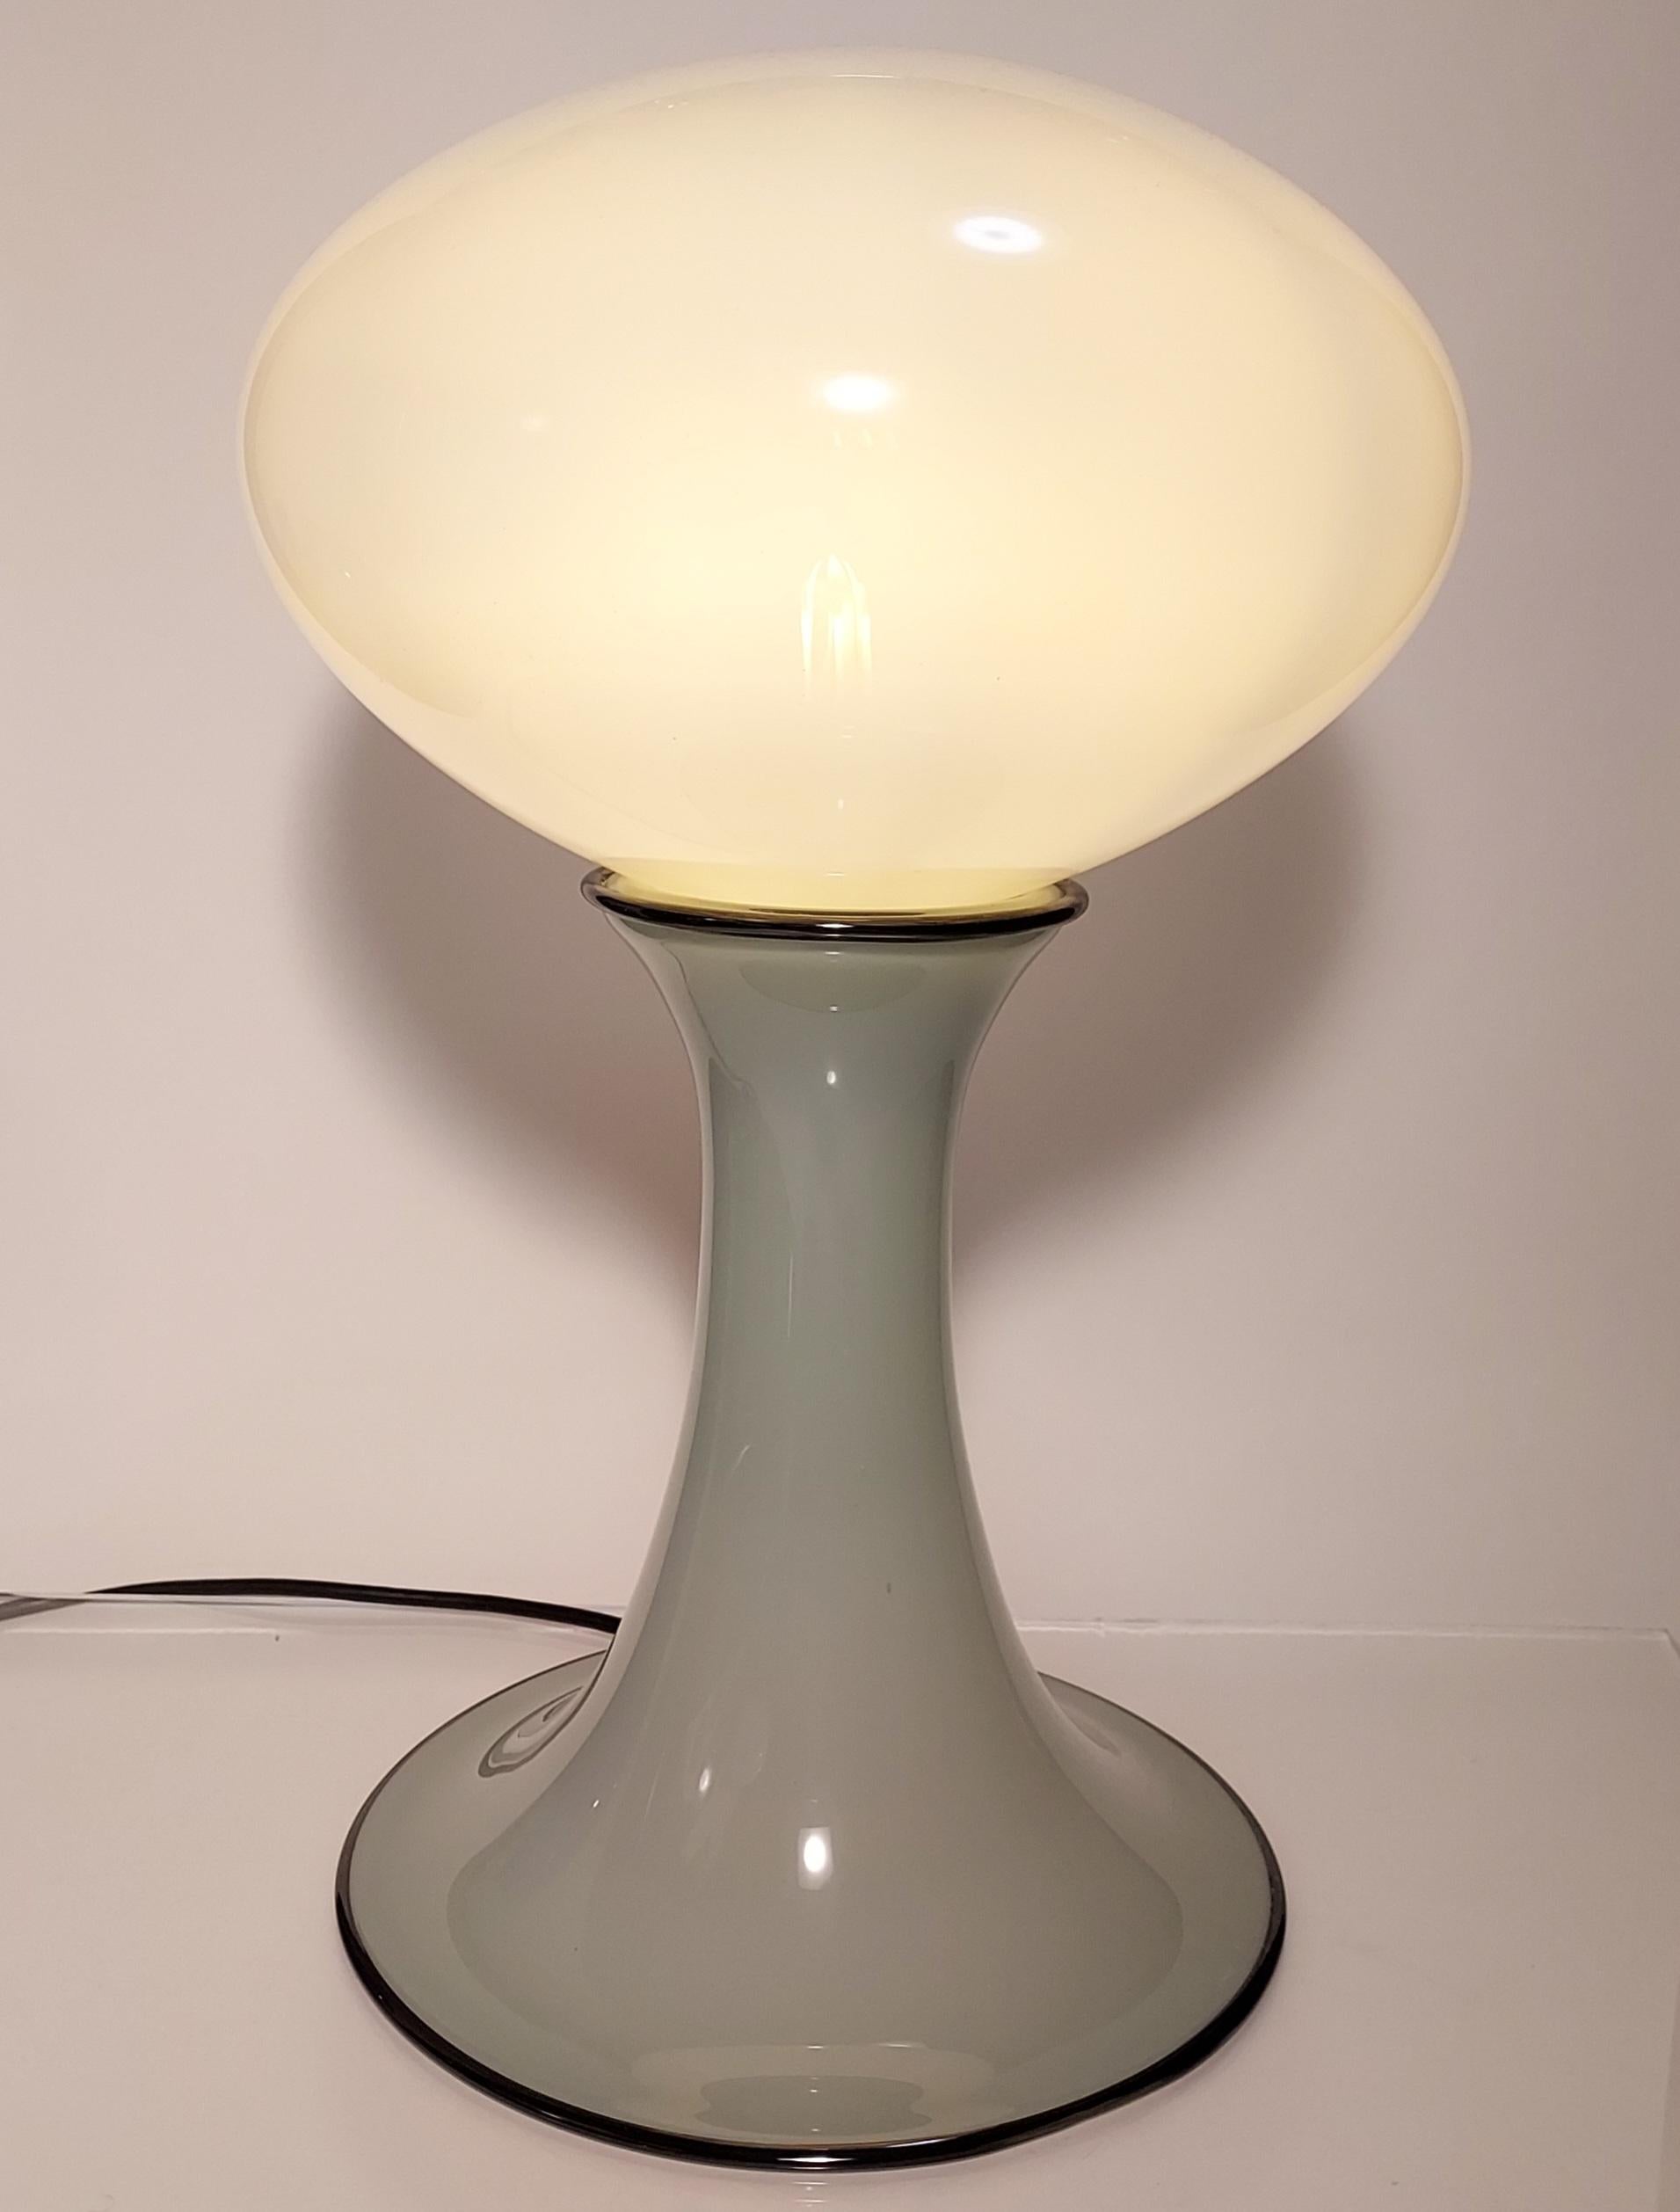 Futura Table Lamps, Handmade Contemporary Luxury Glass Lighting In New Condition For Sale In New York, NY